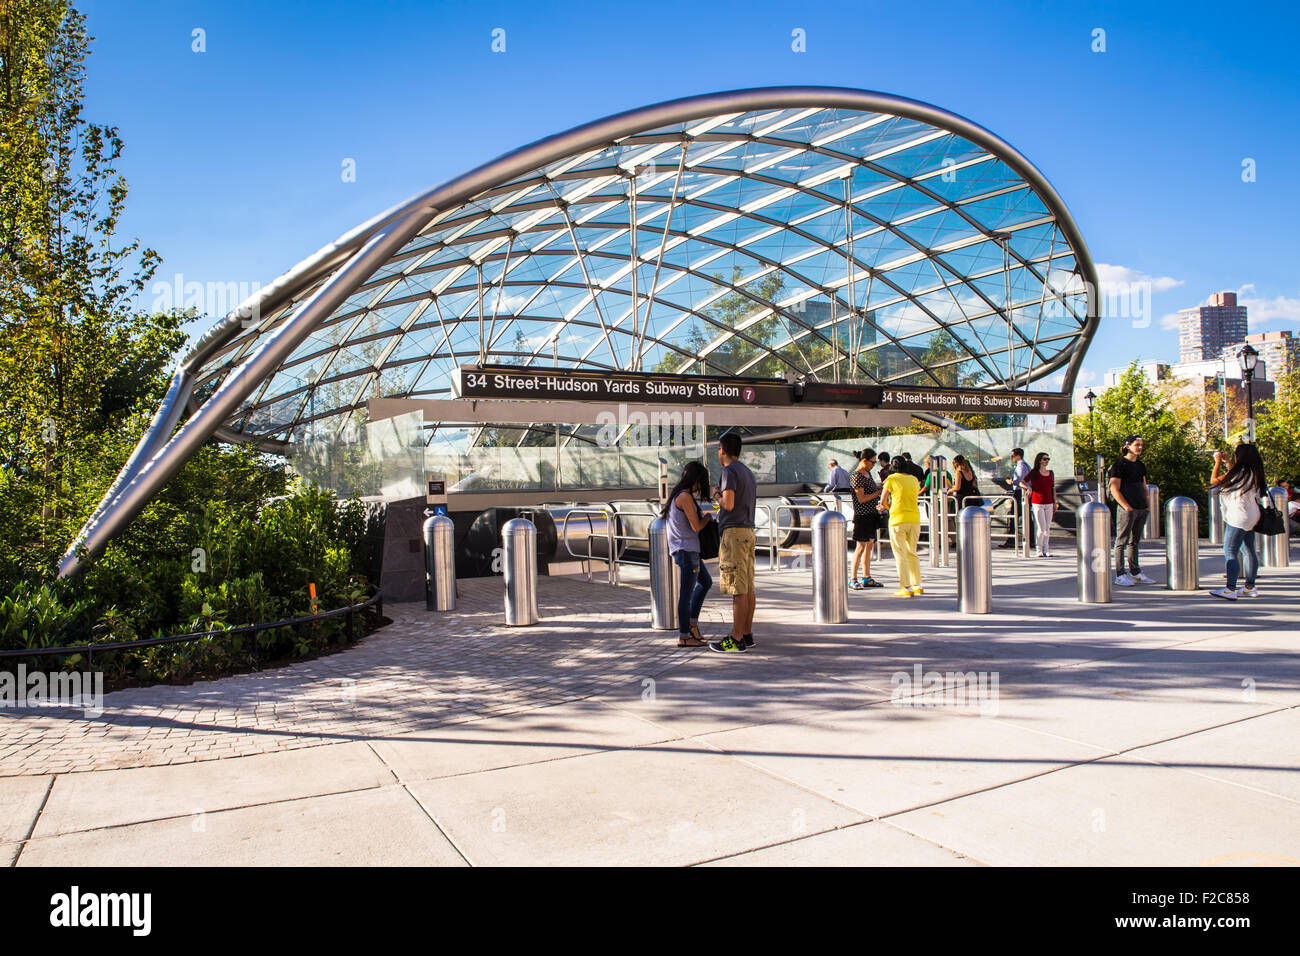 street view at new Hudson Yards 7 train subway station with travelers visible. Stock Photo